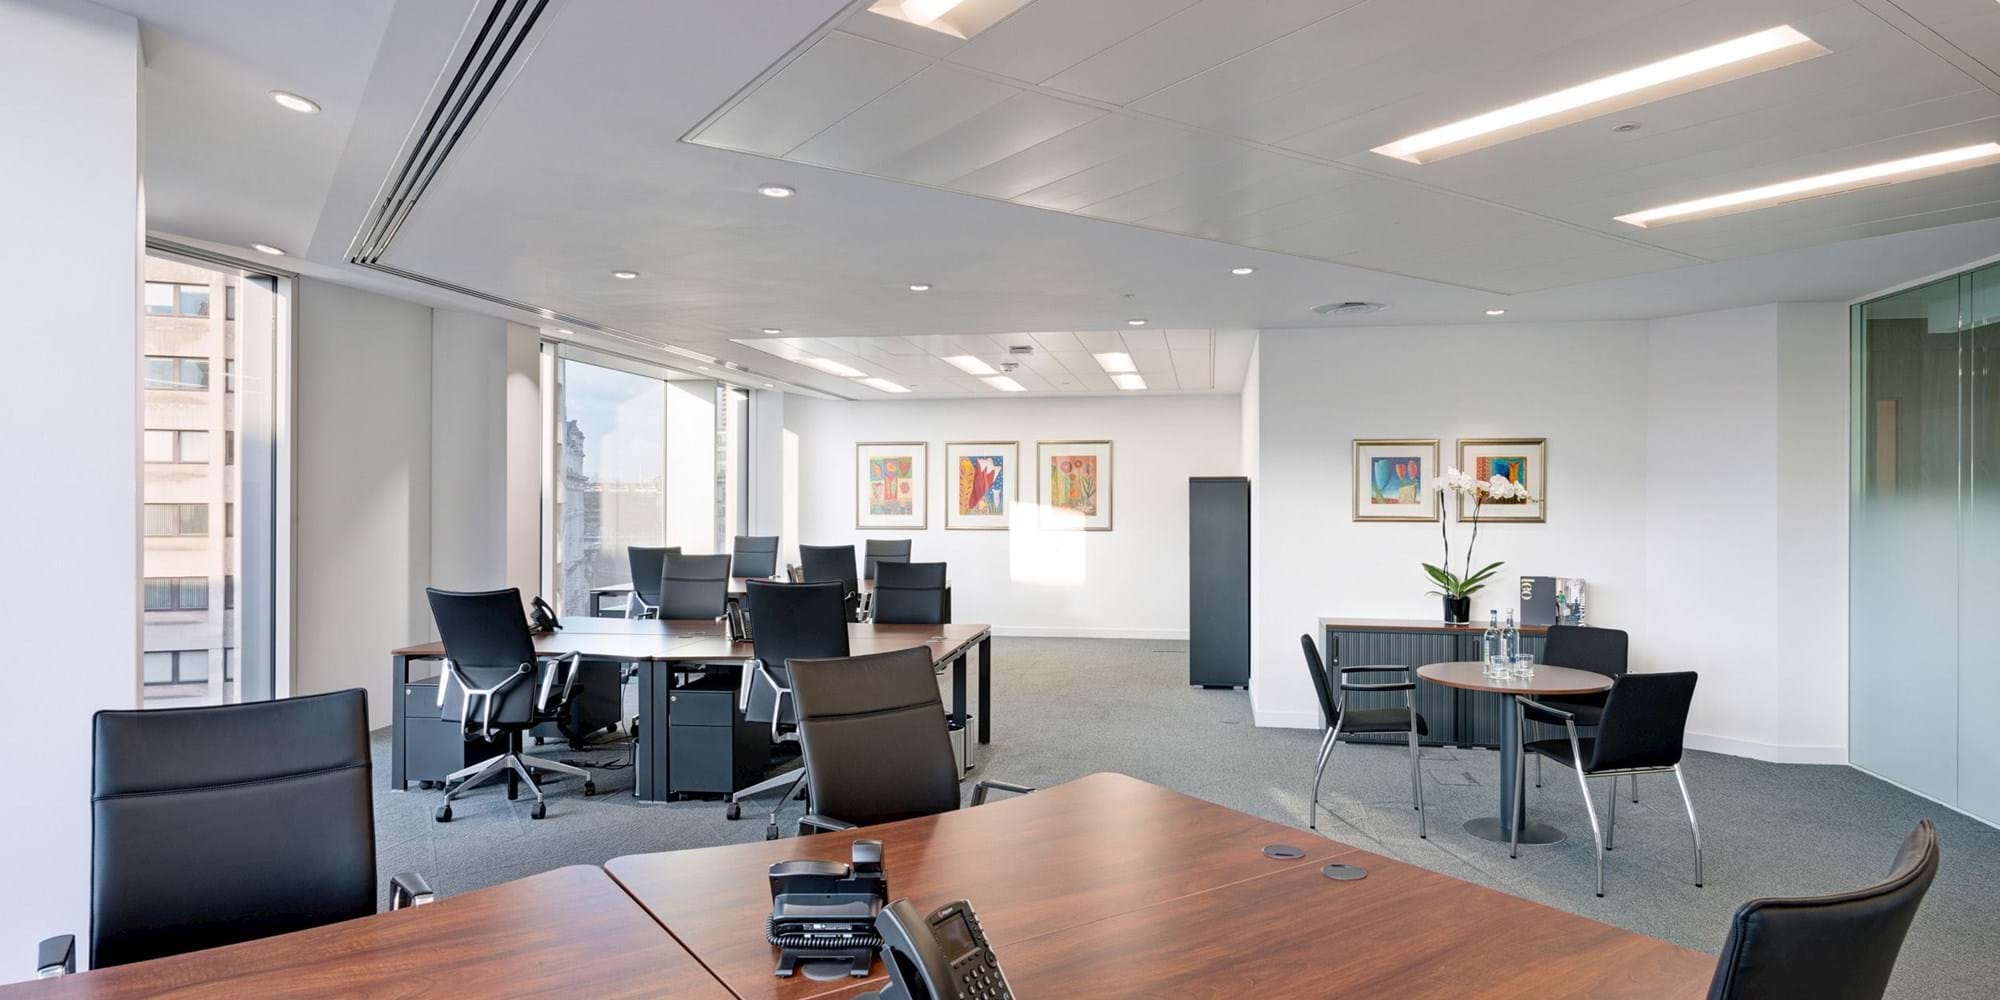 Modus Workspace office design, fit out and refurbishment - LEO - St Pauls - LEO St Pauls 10 highres sRGB.jpg